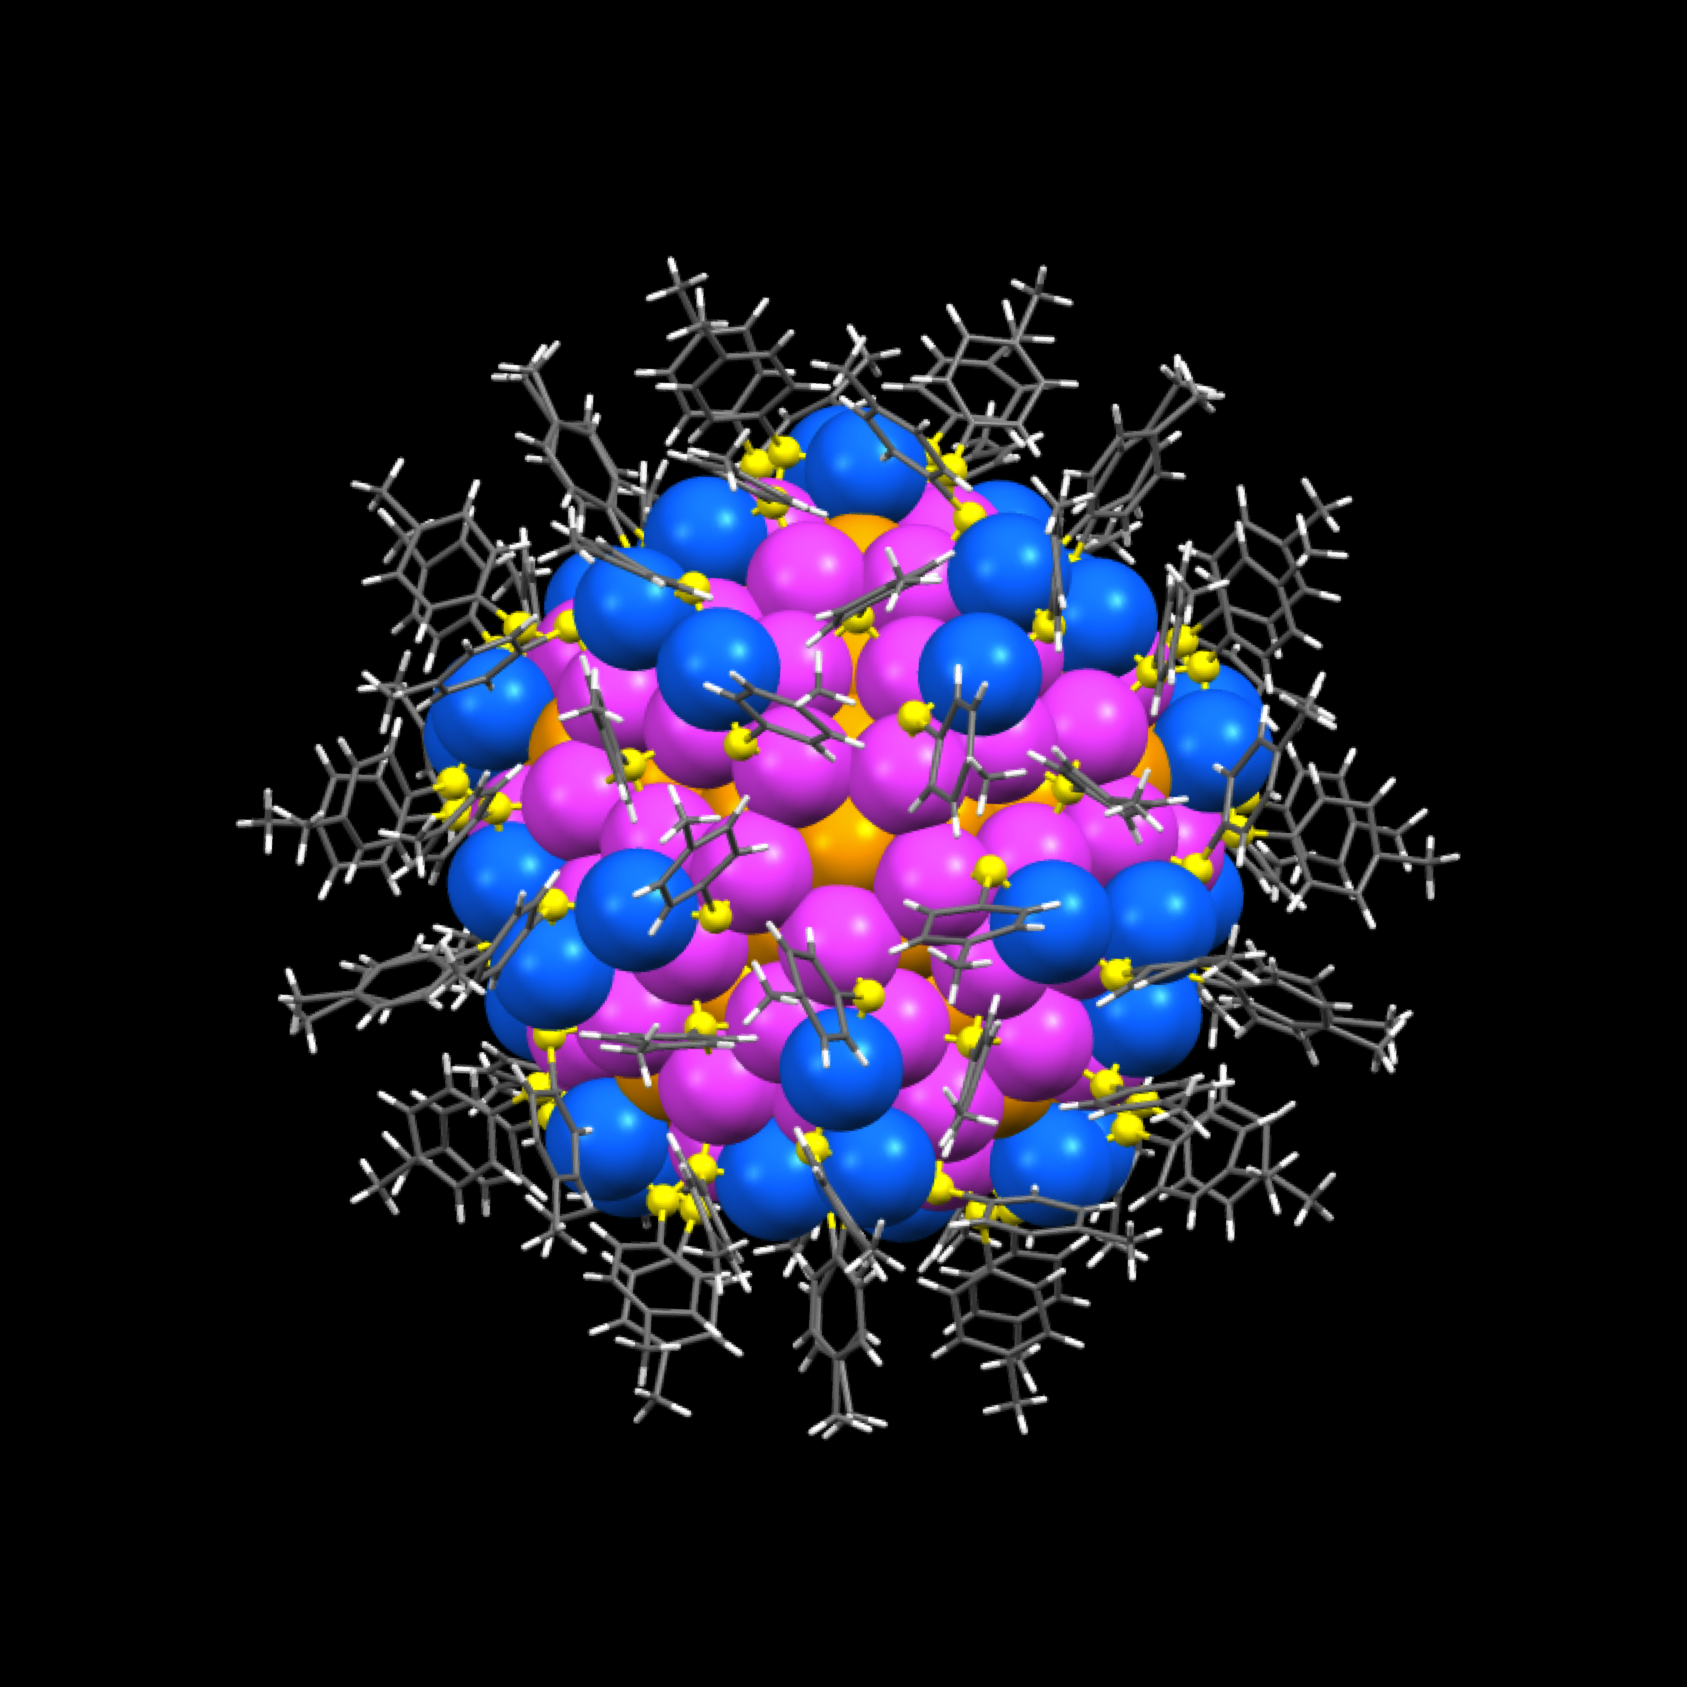 Synthetic Nanoparticles Achieve the Complexity of Protein Molecules of Chemistry College of Science Mellon University